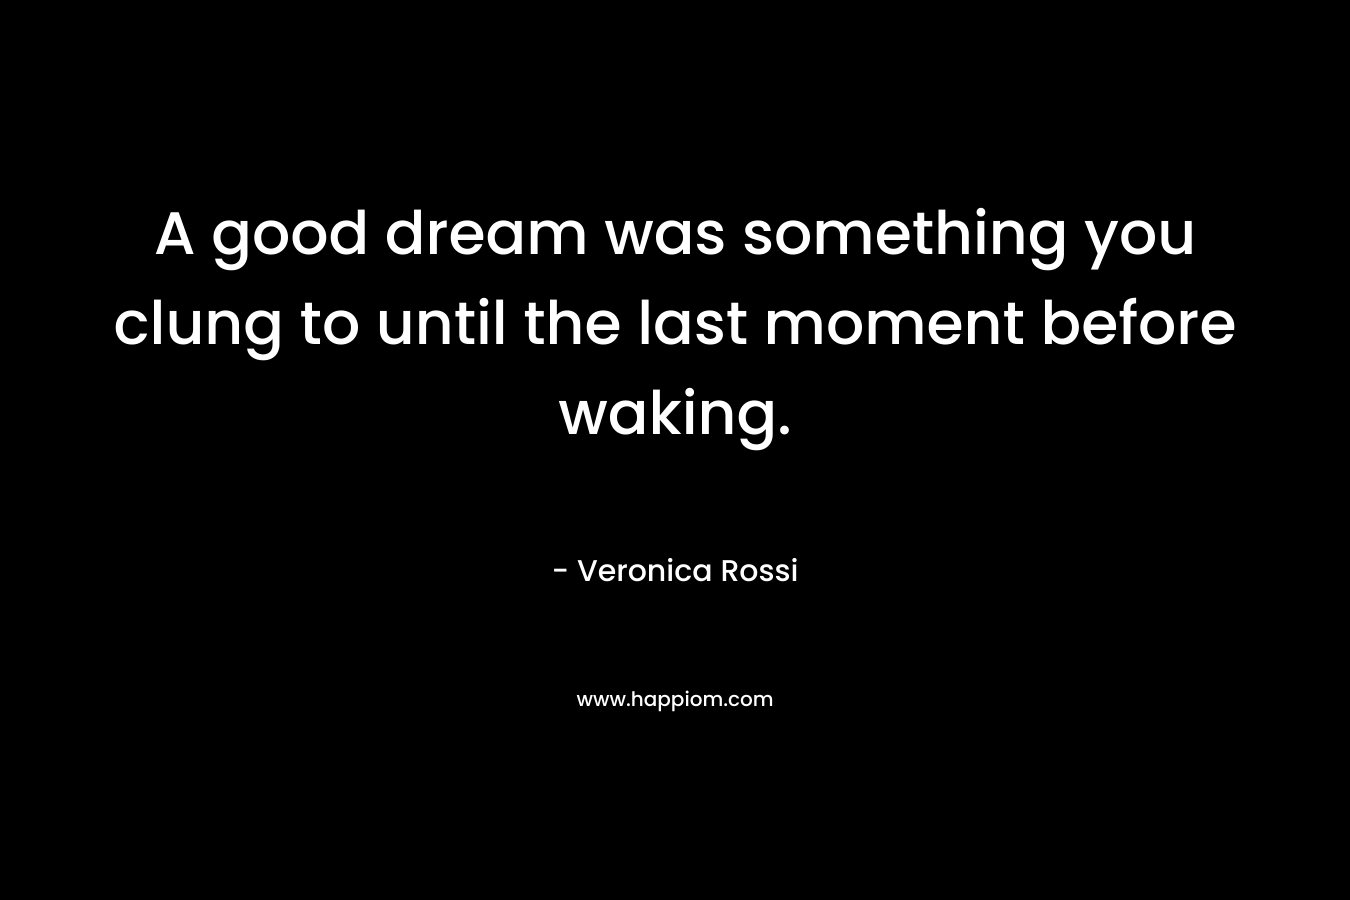 A good dream was something you clung to until the last moment before waking. – Veronica Rossi